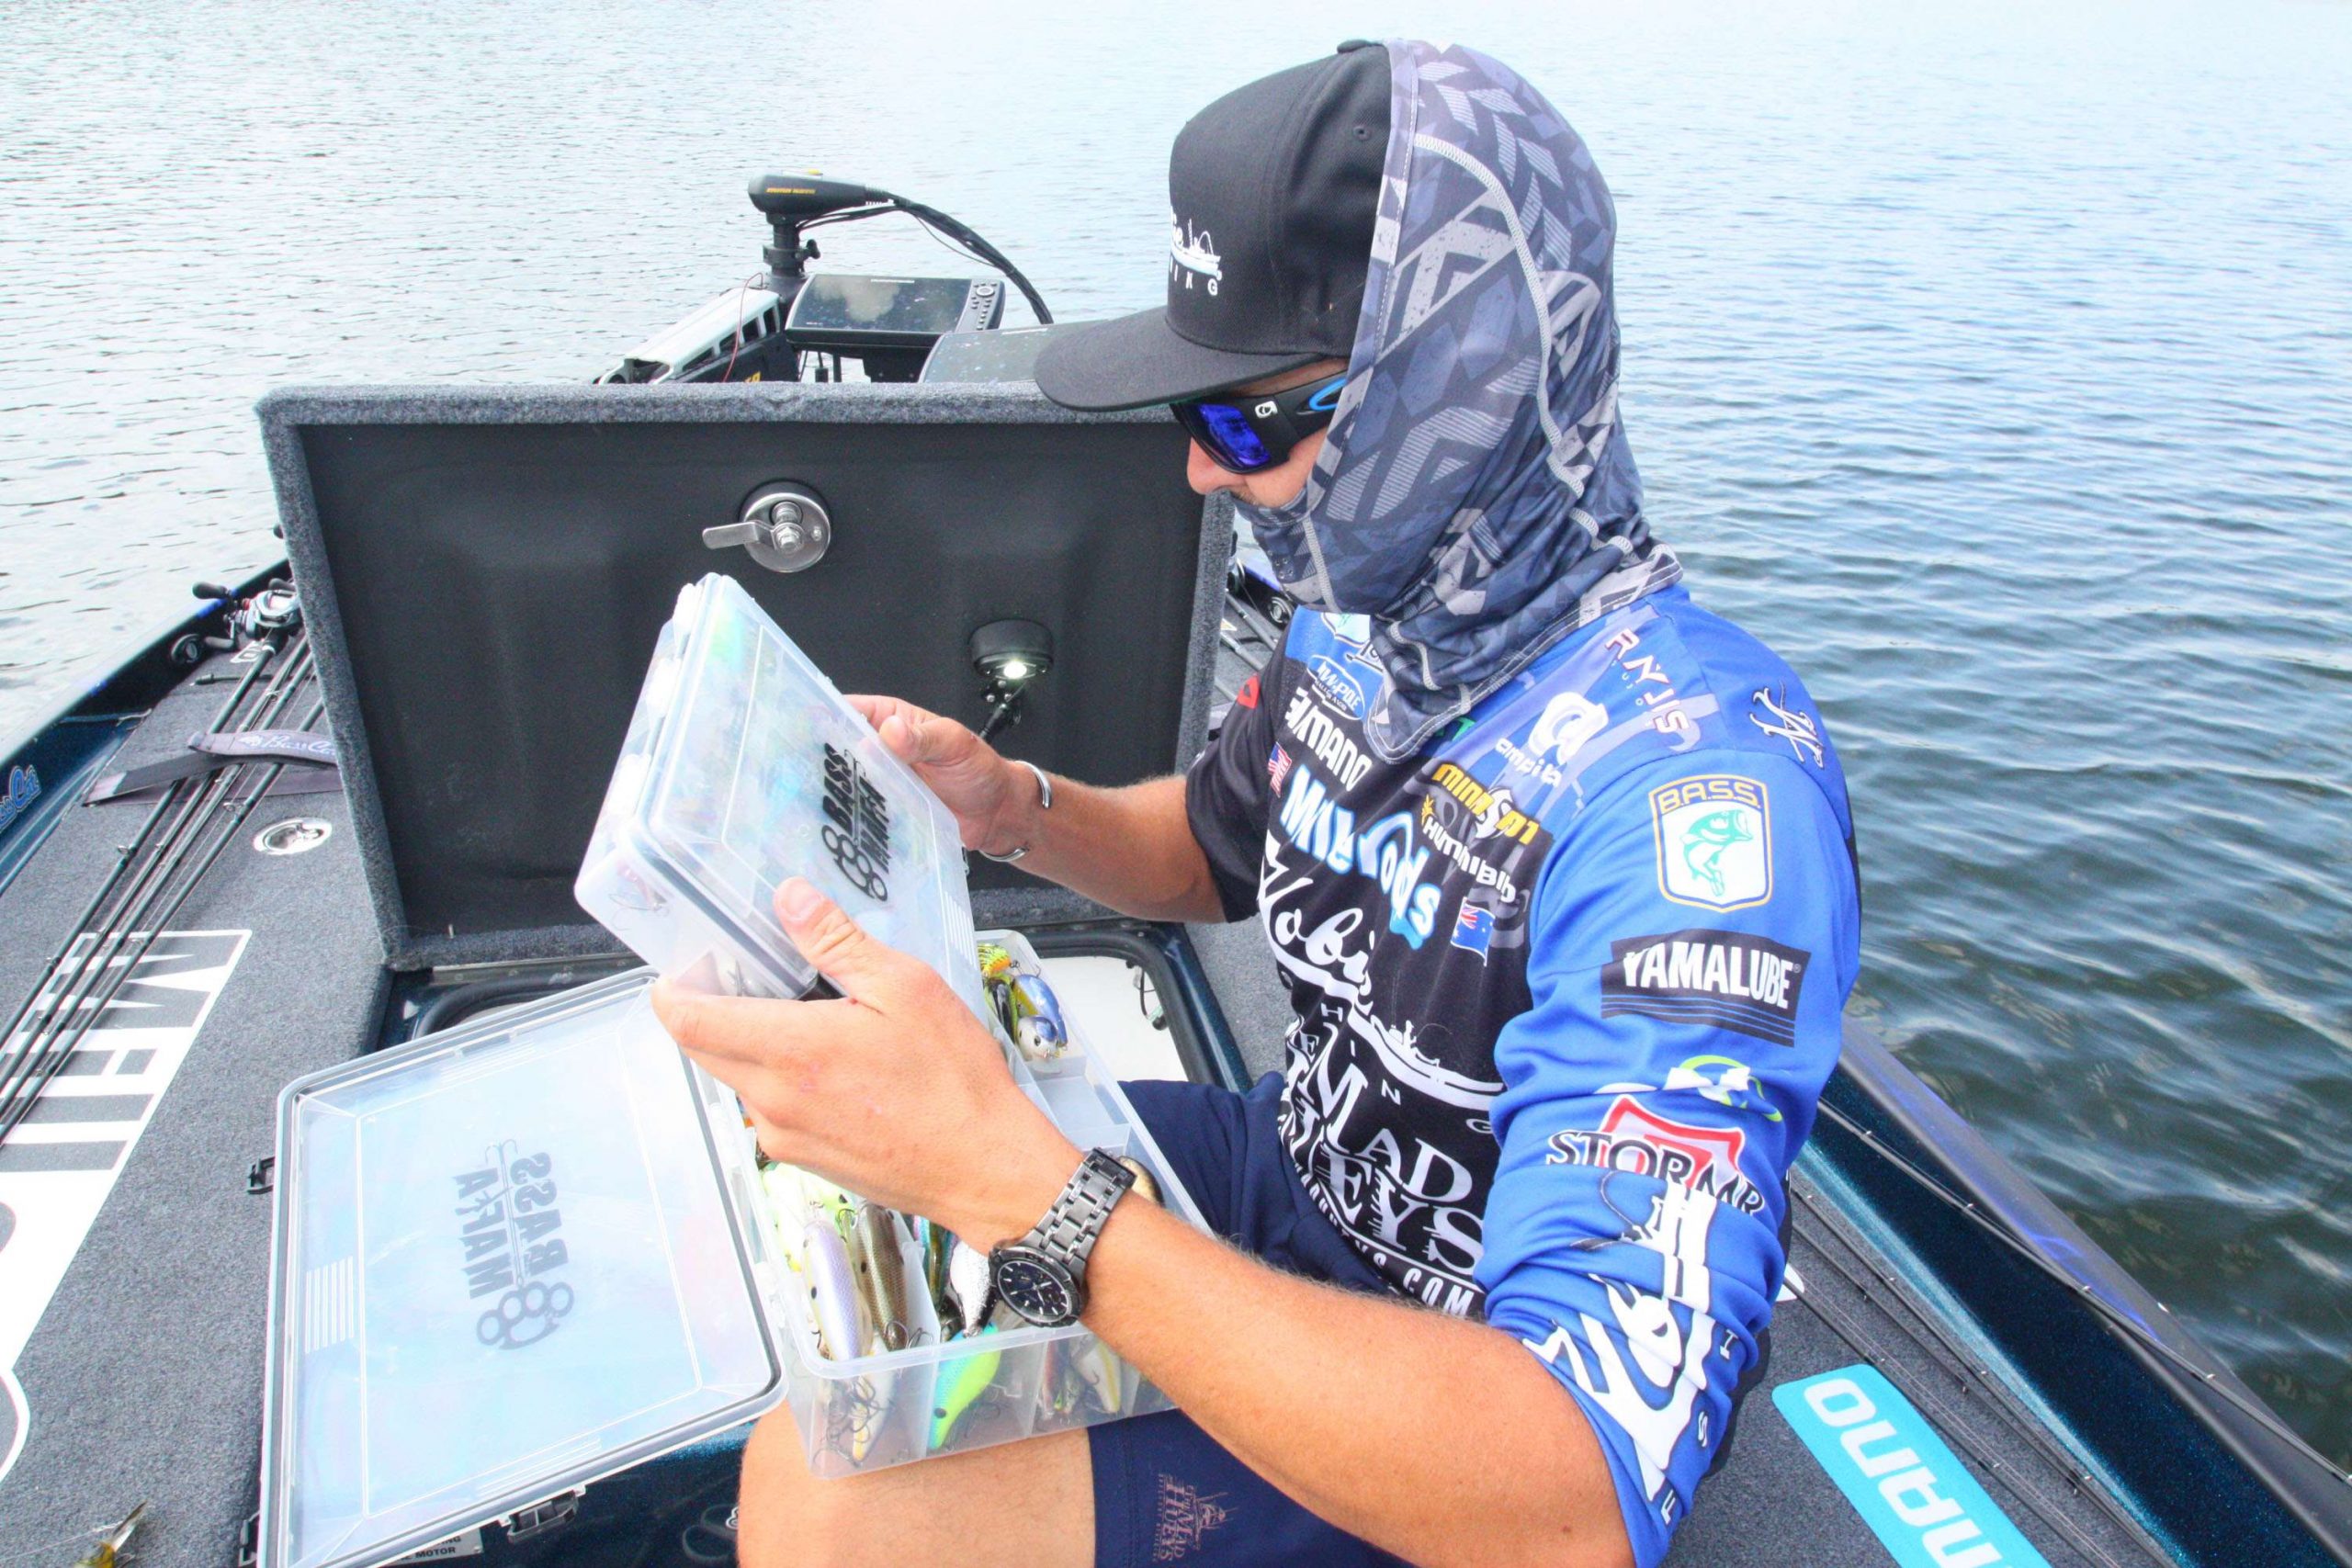 <b>11:02 a.m.</b> Jocumsen decides to shift gears and fish a nearby main-lake point. The structure is shallow on top, studded with stumps and drops off into 16 feet on either side. He pulls out several crankbait boxes and selects a crawfish colored Molix Sculpo deep-diver. âI caught lots of fish on this bait at the 2016 Bull Shoals [Arkansas] Elite tournament, so Iâve got confidence in it.â He casts the plug to the end of the point and dredges up a wad of grass. <br>
<b>11:06 a.m.</b> Jocumsen switches to a shad pattern Strike King 6XD crankbait and grinds it off the side of the point. <br>
<b>11:09 a.m.</b> He replaces the 6XD with a perch-colored Molix F Crank DR. âIâm seeing some suspended fish on my electronics, but so far I havenât found the right trigger for them.â <br>
<b>11:11 a.m.</b> A bass bumps the F Crank but doesnât hook up. Jocumsen immediately casts the swimbait with the belly spinner to the same spot. No takers. <br>
<b>11:14 a.m.</b> Jocumsen opts to try a finesse worm off the point. He rigs a Roboworm in the margarita mutilator color on a No. 1 drop-shot hook, attaches a 12-inch drop line with a 3/8-ounce sinker below the lure, then drags it across rocks on the bottom. He immediately detects a bite, tightens down on the fish and swings a nonkeeper aboard. âIâm seeing several fish on my electronics, and they donât all look this small.â <br>
<b>11:17 a.m.</b> A good fish picks up the Roboworm. Jocumsen sticks it momentarily, but it comes unbuttoned. âThat one felt solid.â Whatâs his take on the day so far? âThe early pad bite looked promising, but it died off quickly and Iâve been struggling ever since. There are some big fish in this lake, and Iâm hoping I can get something going. Iâll fish out this point, hit a couple other deep structures, make a quick pass through some more pads, then hit the dam once more in my remaining time.â <br>
<b>11:20 a.m.</b> Jocumsen catches a microbass on the Roboworm. <br>
<b>11:21 a.m.</b> Another tiny bass eats the Roboworm. âIâm still seeing some big fish down there on my electronics.â <br>
<b>11:24 a.m.</b> Jocumsen casts the spinnerbait to the same spot and slow rolls it through the water column. As it nears the boat, he marks a big fish moving up from deep water toward the bait on his graph, but it doesnât strike. <br>
<b>11:27 a.m.</b> Having followed the point toward shore, Jocumsen switches crankbaits to a shad colored Lucky Craft 2.5 squarebill and retrieves it parallel to the edge of the structure. <br>
<b>11:40 a.m.</b> Back to the Roboworm on the point. A bass strips the worm off the rig.
<p>
<b>2 HOURS LEFT</b><br>
<b>11:45 a.m.</b> The squarebill dredges up a wad of snot grass. <br>
<b>11:51 a.m.</b> Jocumsen makes a short hop back to the pads where he caught his two keepers and drags the rat across the cover. <br>
<b>11:59 a.m.</b> He moves to a point at the tributary entrance and tries the swim jig around submerged hydrilla.
